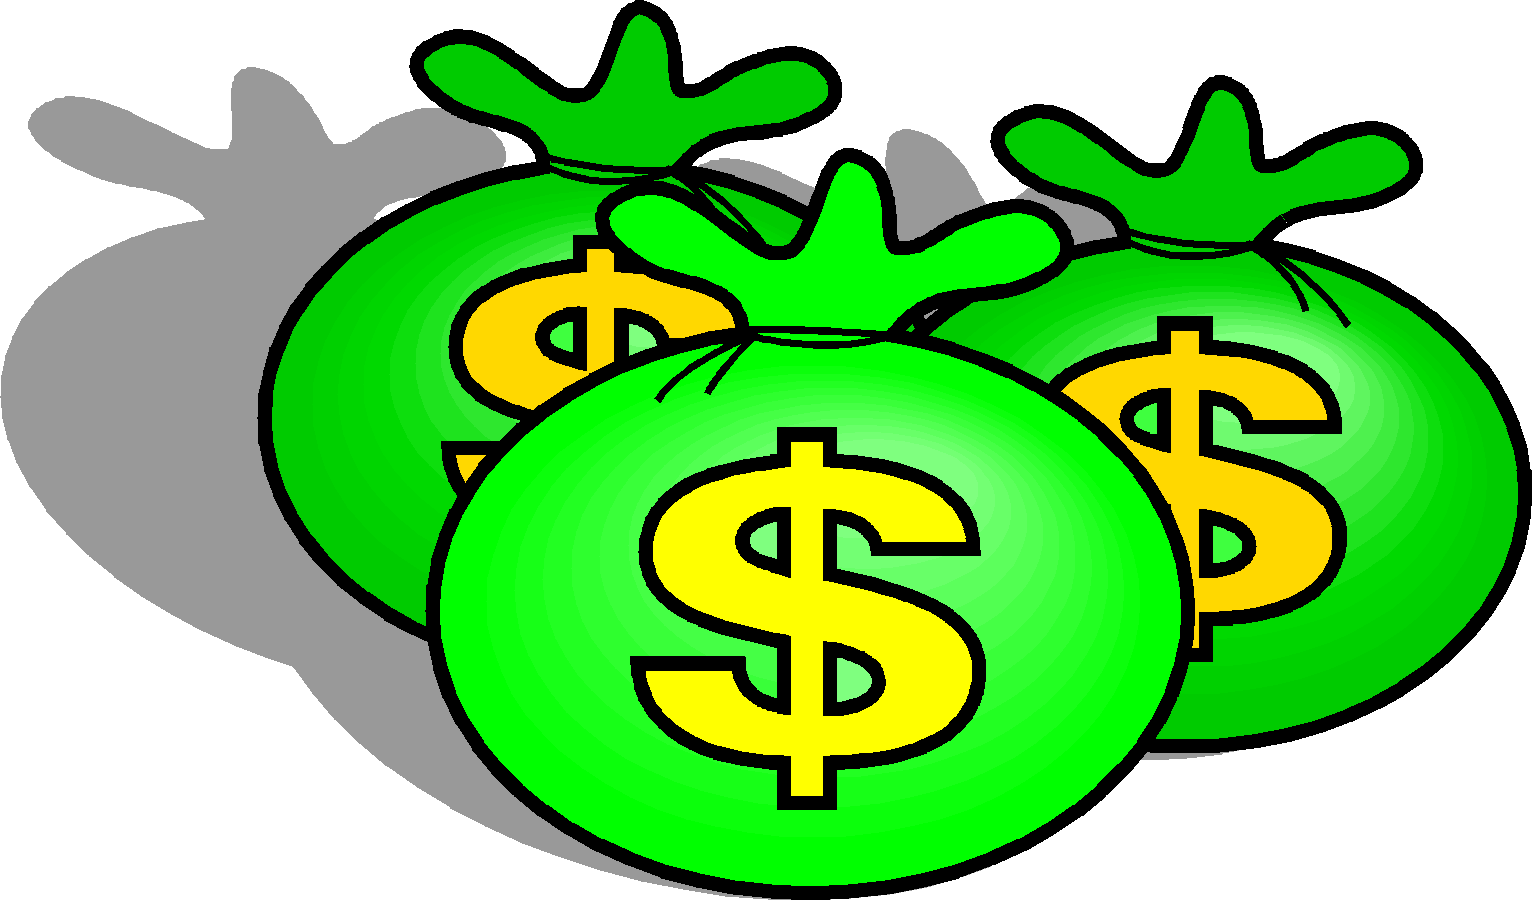 moving money clipart - photo #32